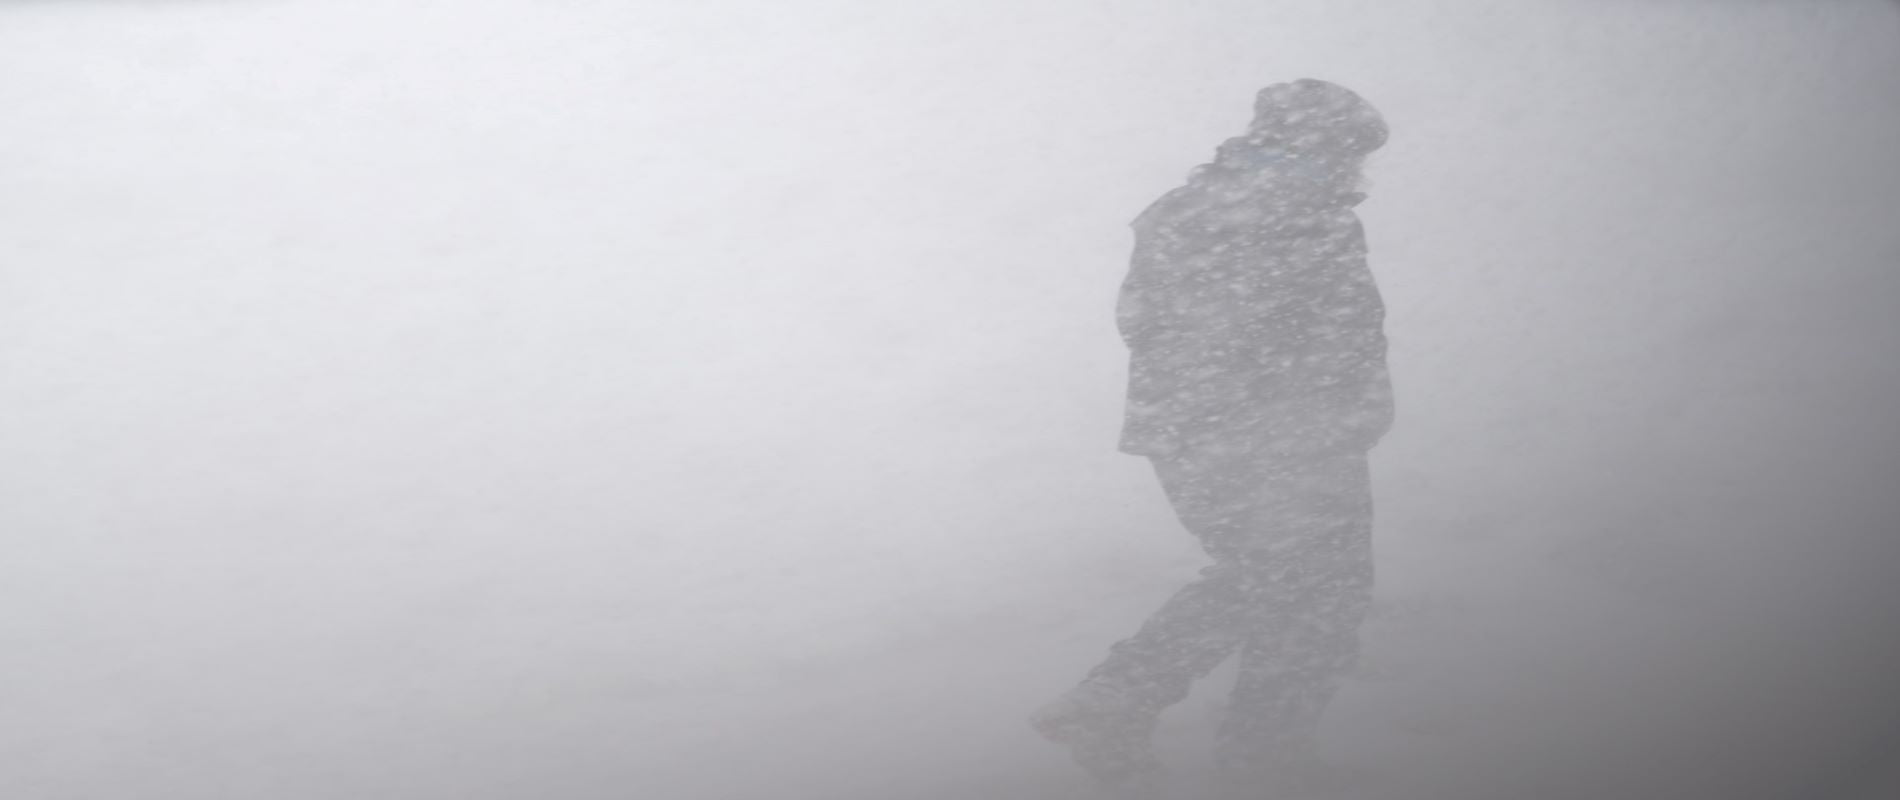 Person walking against the wind in a whiteout snowsquall snowstorm.